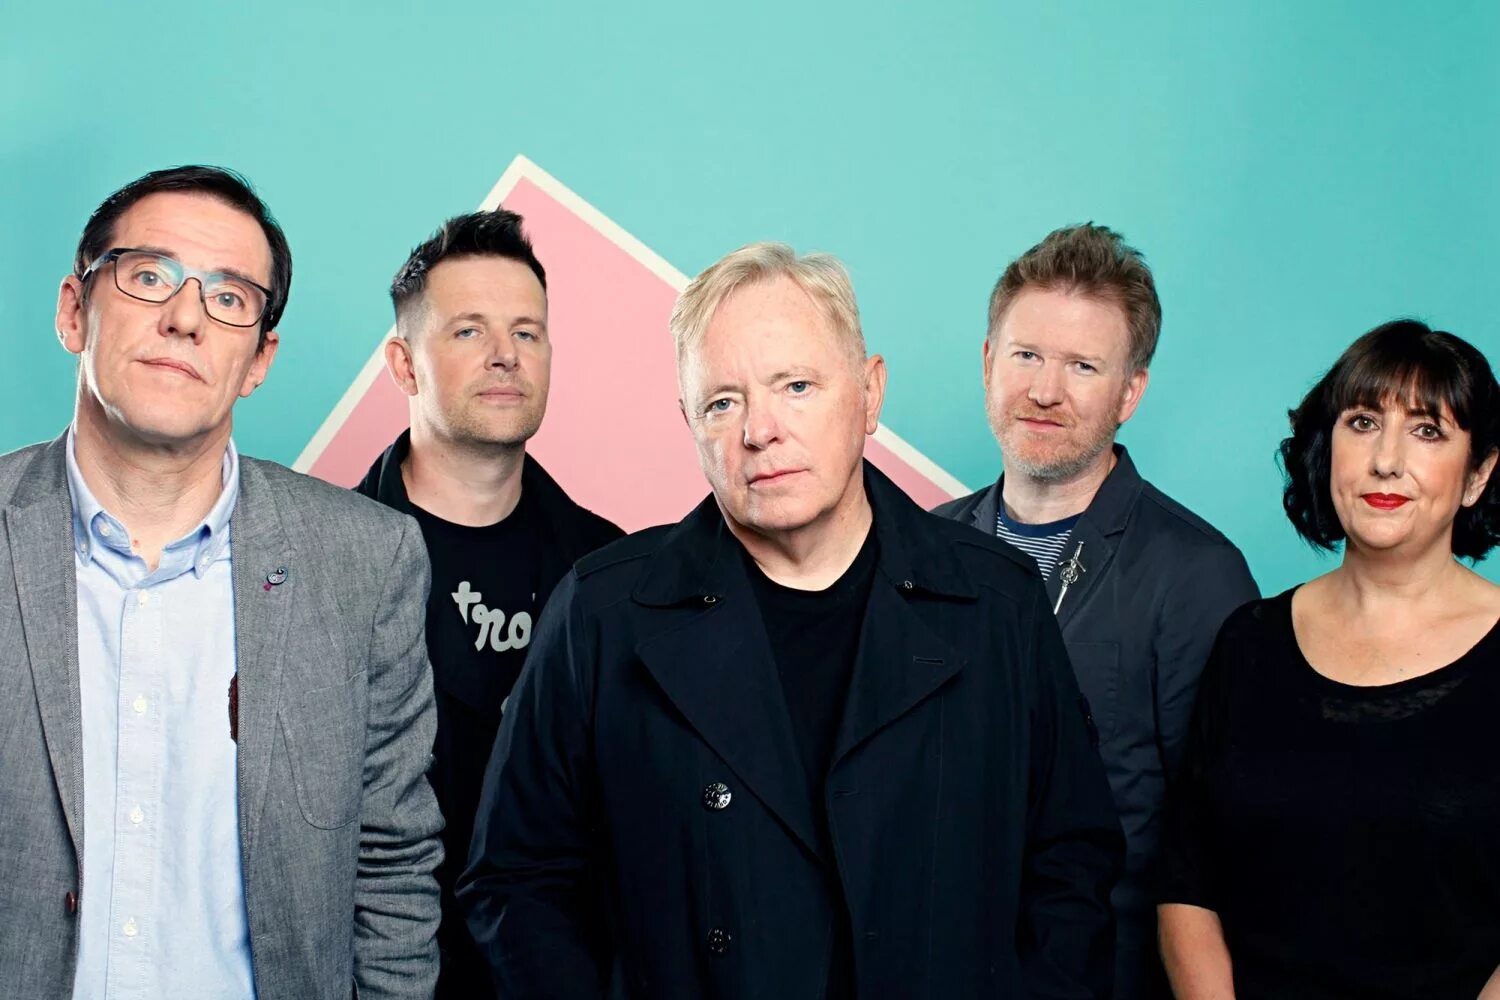 Have you new order. New order. New order Band. Группа New order 1980s. New order 2007.